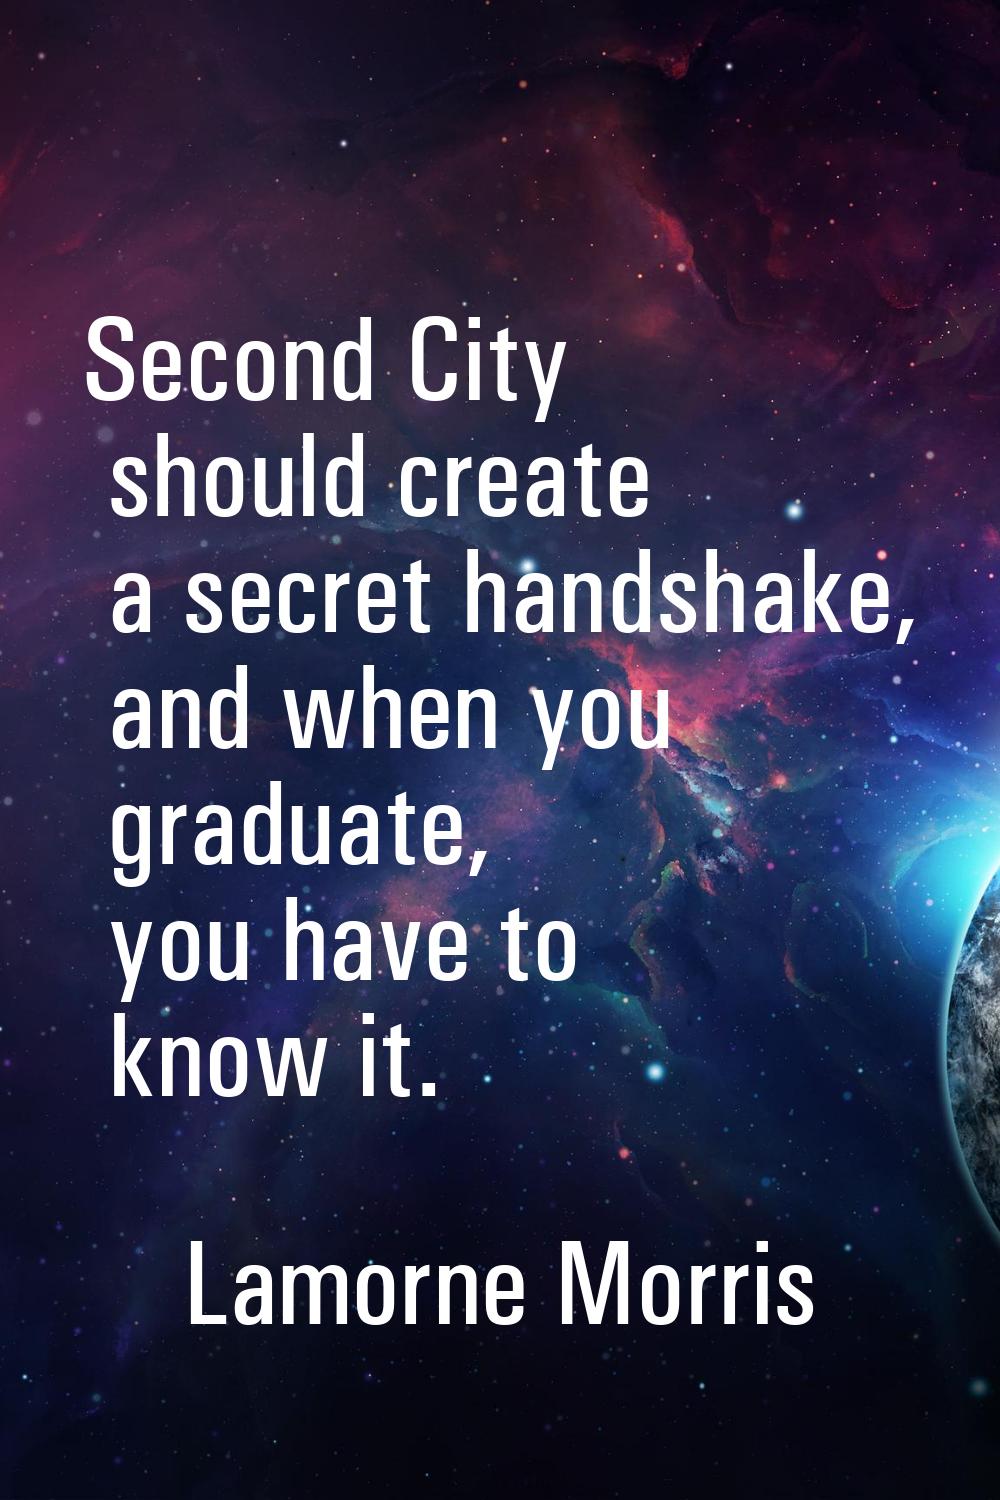 Second City should create a secret handshake, and when you graduate, you have to know it.